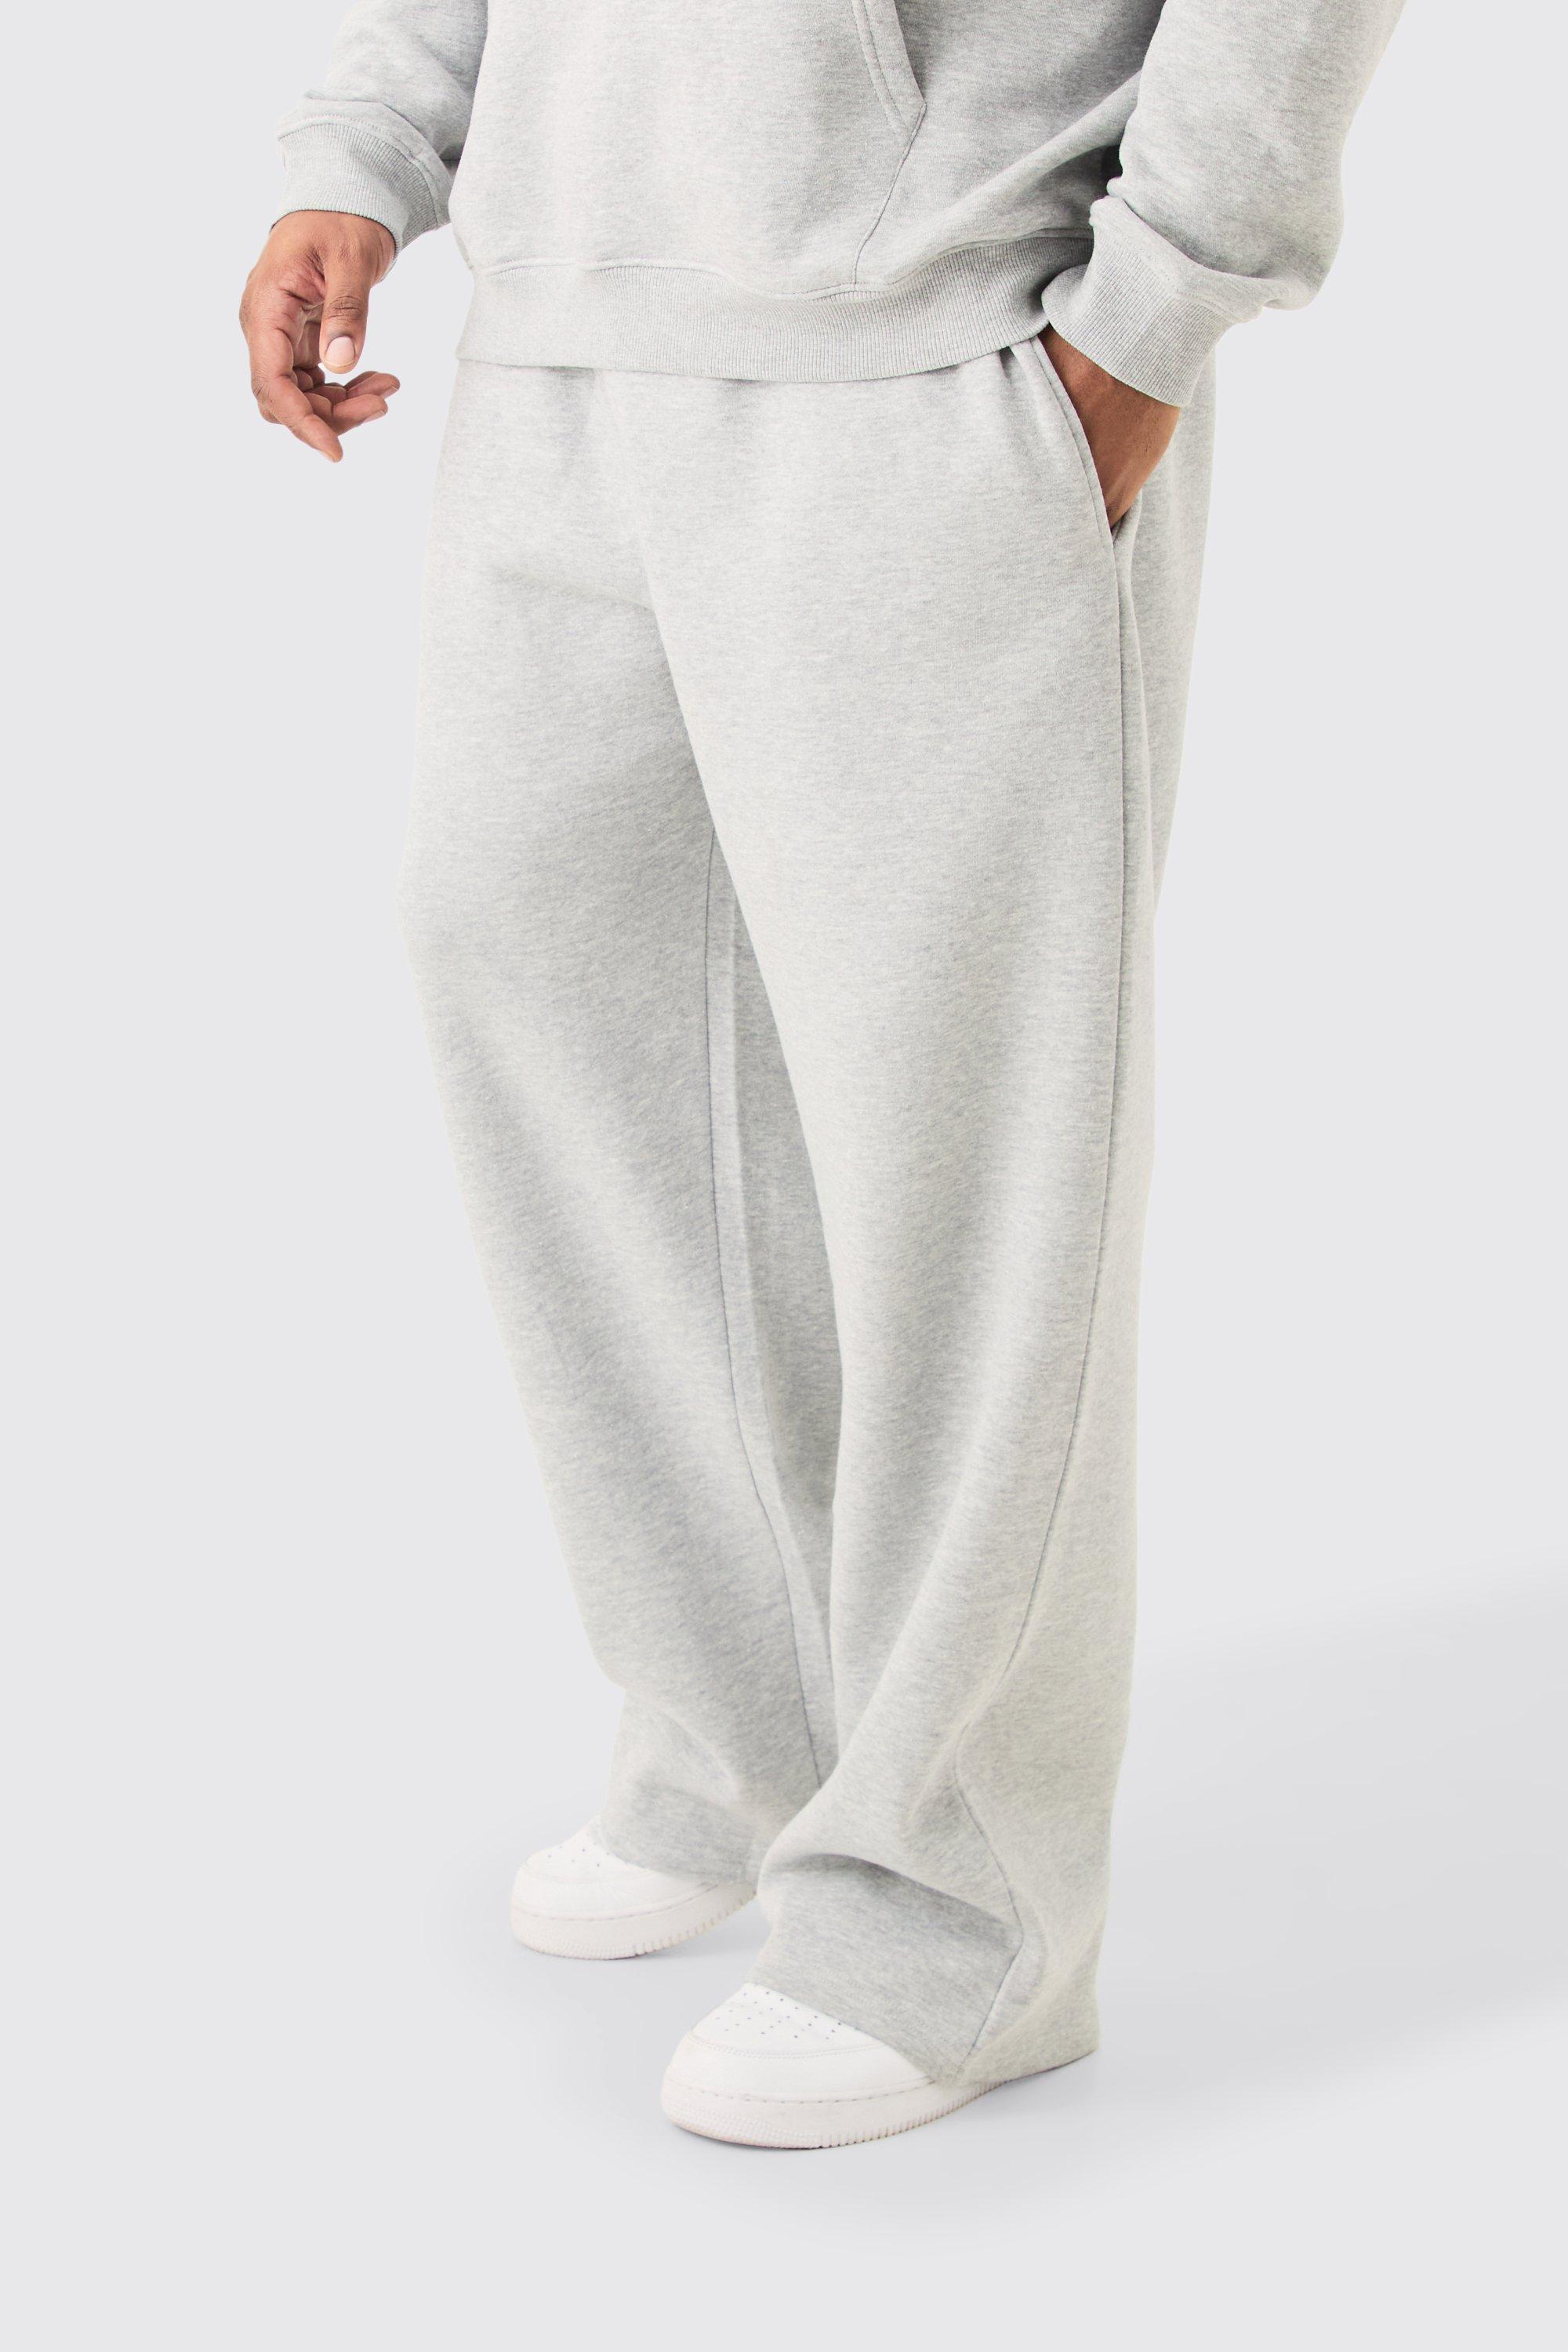 Image of Plus Basic Relaxed Fit Jogger In Grey Marl, Grigio